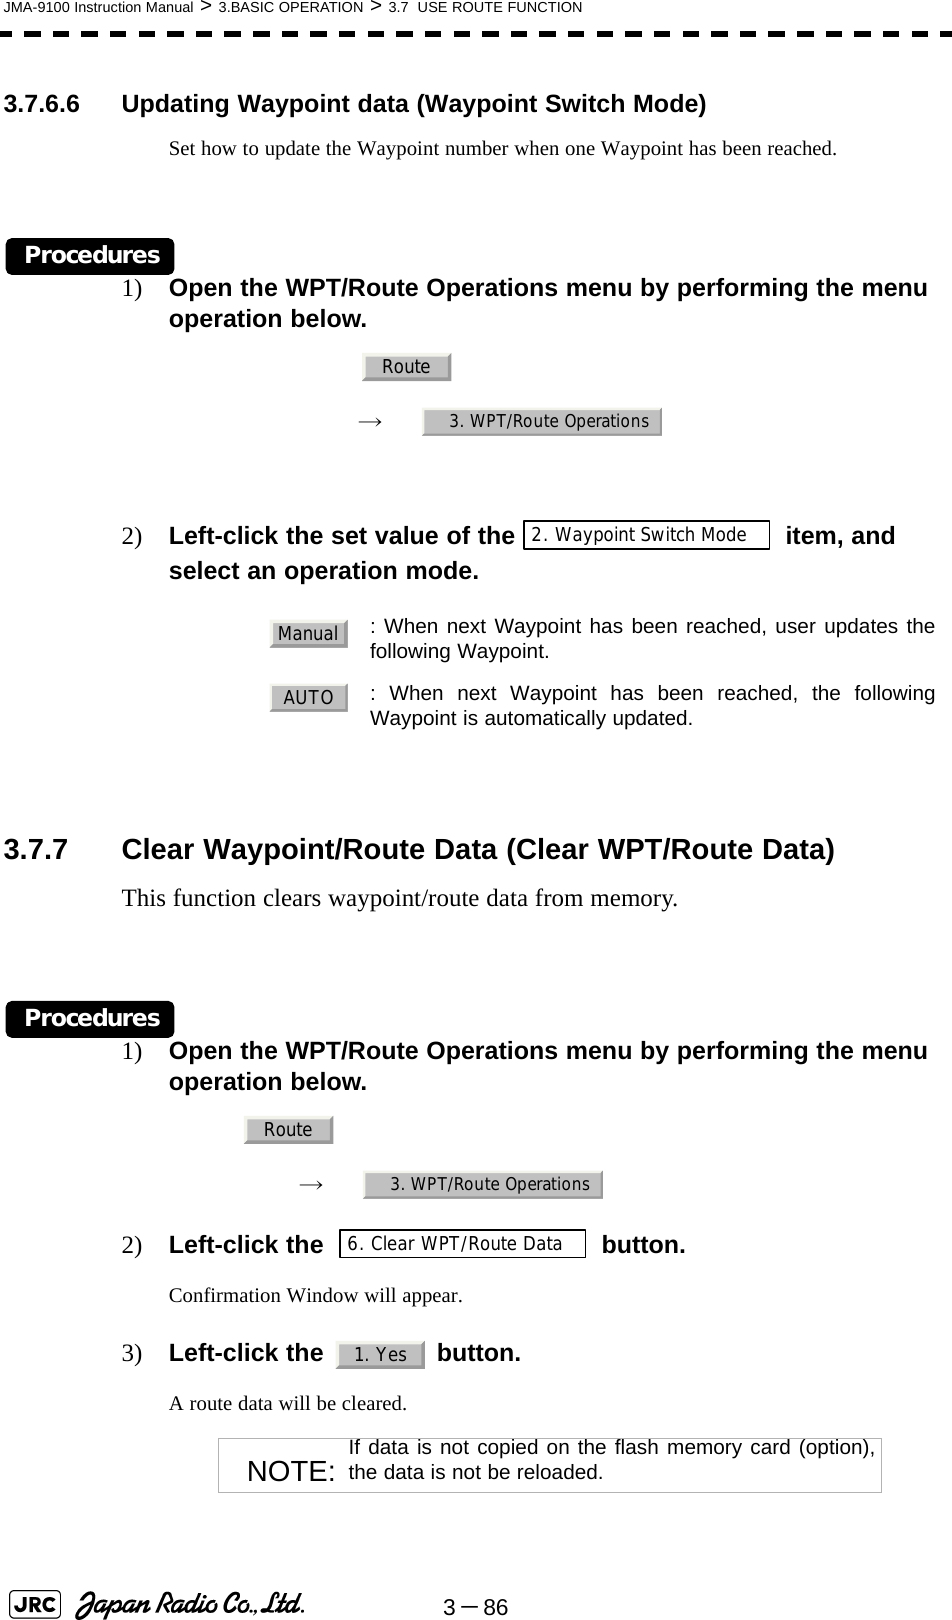 3－86JMA-9100 Instruction Manual &gt; 3.BASIC OPERATION &gt; 3.7  USE ROUTE FUNCTION3.7.6.6 Updating Waypoint data (Waypoint Switch Mode)Set how to update the Waypoint number when one Waypoint has been reached.Procedures1) Open the WPT/Route Operations menu by performing the menu operation below.　　 →　2) Left-click the set value of the  item, and select an operation mode.3.7.7 Clear Waypoint/Route Data (Clear WPT/Route Data)This function clears waypoint/route data from memory.Procedures1) Open the WPT/Route Operations menu by performing the menu operation below.→　2) Left-click the   button.Confirmation Window will appear.3) Left-click the   button.A route data will be cleared. : When next Waypoint has been reached, user updates thefollowing Waypoint.  : When next Waypoint has been reached, the followingWaypoint is automatically updated.NOTE: If data is not copied on the flash memory card (option),the data is not be reloaded.Route3. WPT/Route Operations2. Waypoint Switch ModeManualAUTORoute3. WPT/Route Operations6. Clear WPT/Route Data1. Yes